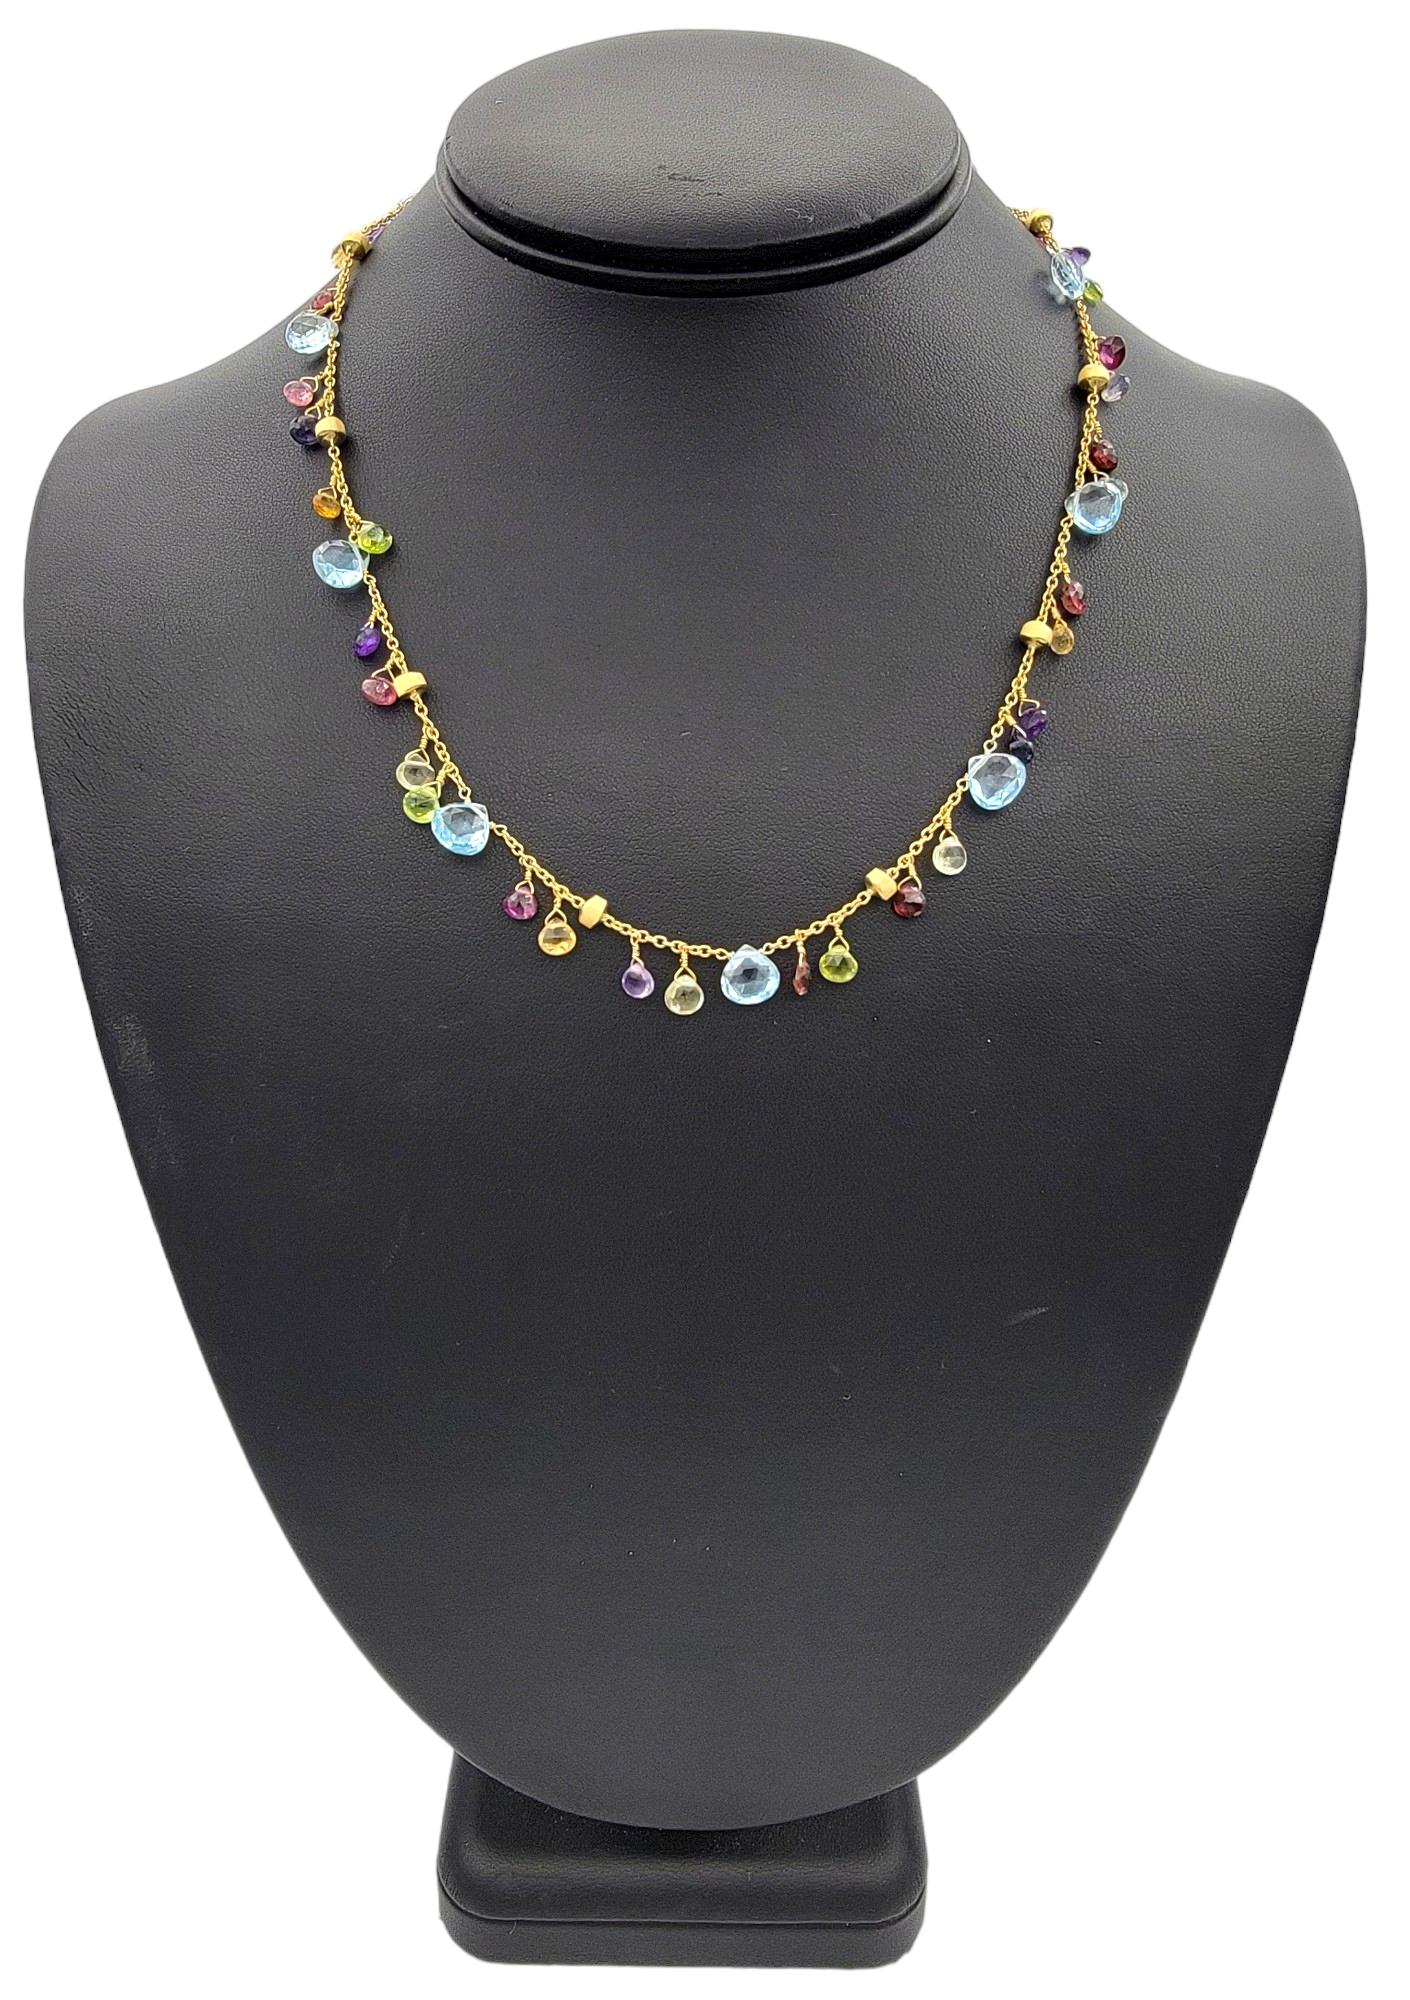 Marco Bicego Paradise Multi-Color Gemstone Necklace Set in 18 Karat Yellow Gold For Sale 1